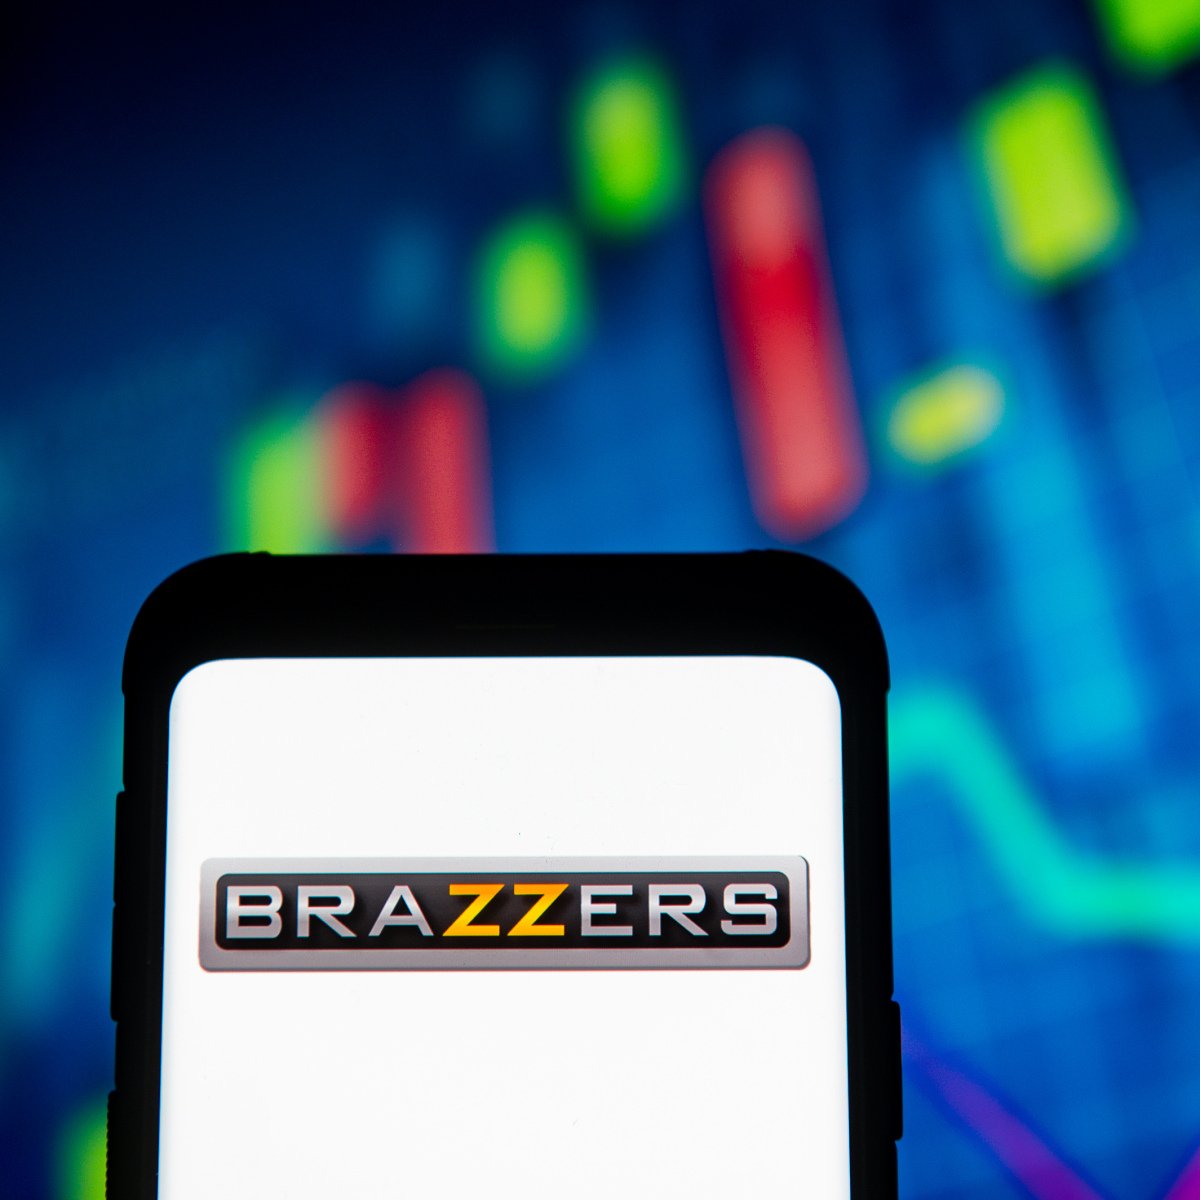 dennis bialecki add does brazzers have an app photo